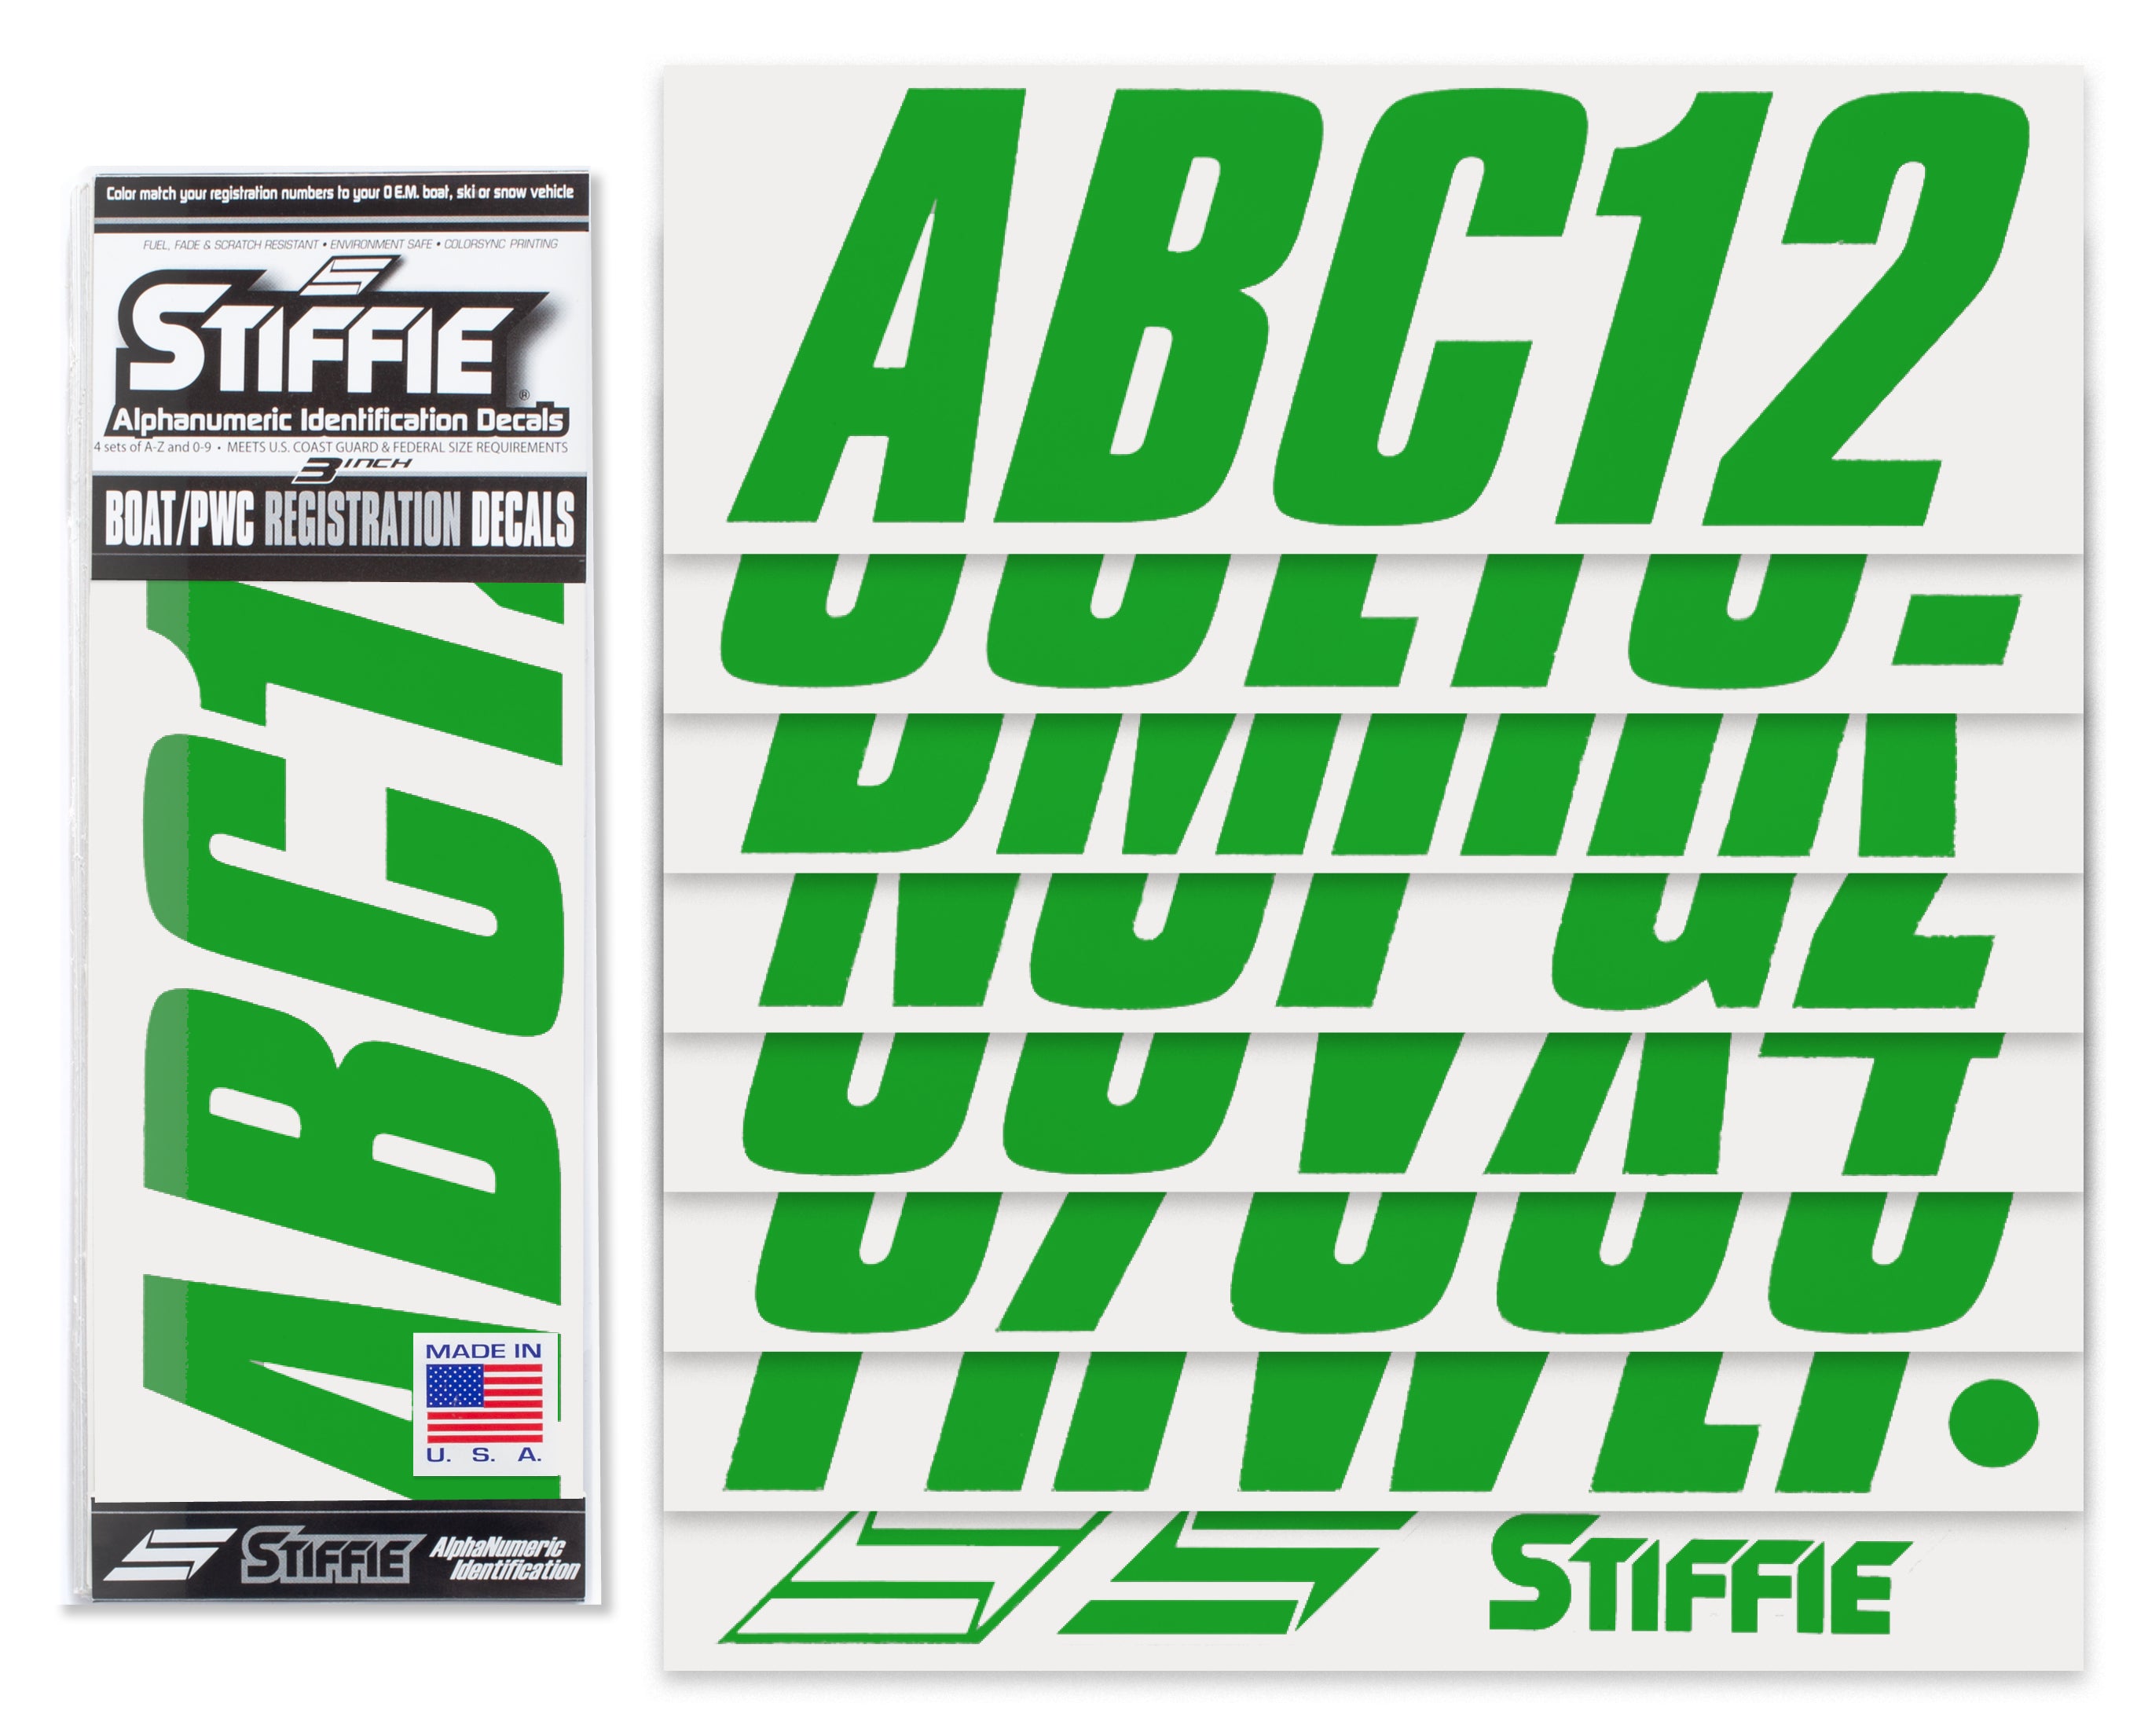 STIFFIE Shift Green 3" ID Kit Alpha-Numeric Registration Identification Numbers Stickers Decals for Boats & Personal Watercraft